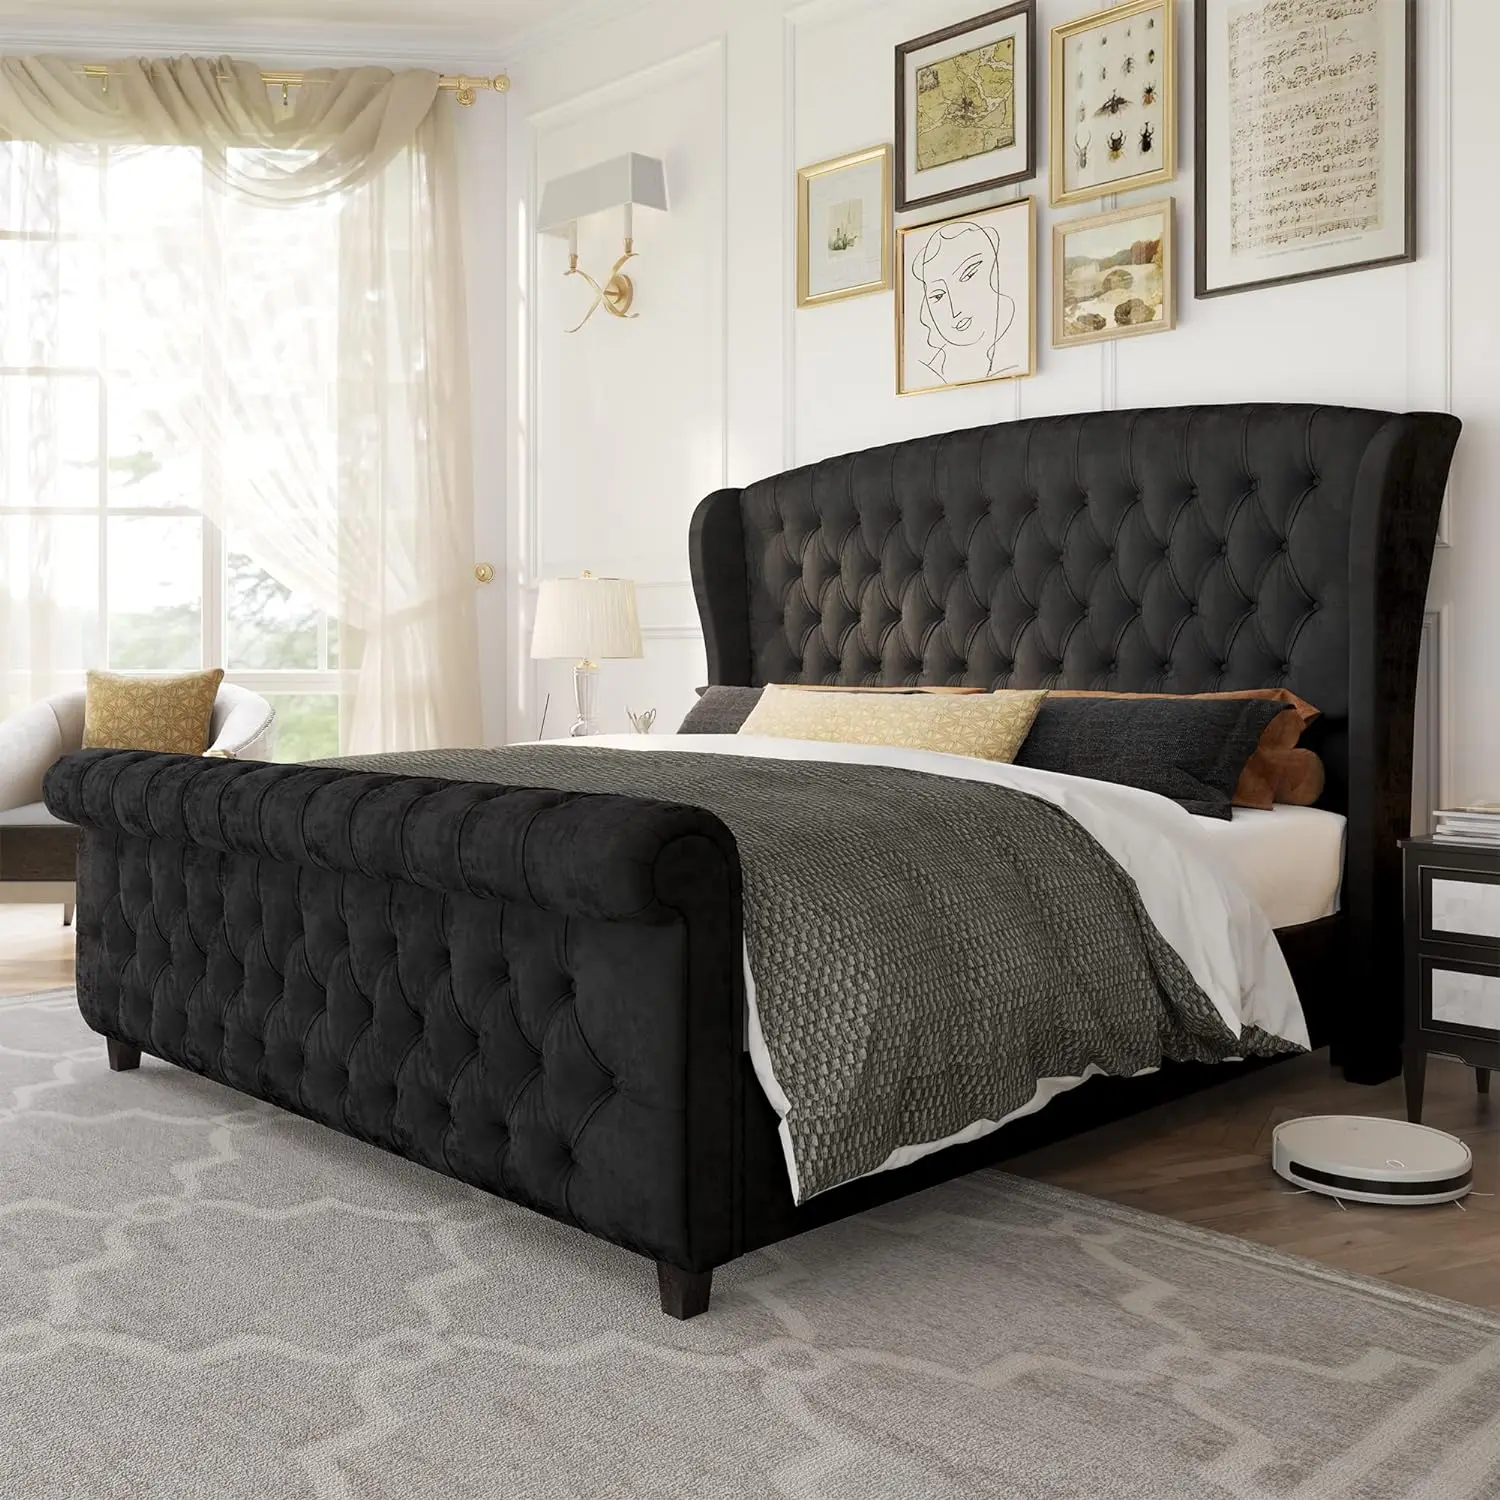 

Queen/King Size Platform Bed Frame,Velvet Upholstered Sleigh Bed with Scroll Wingback Headboard & Footboard/Button Tufted/No Box